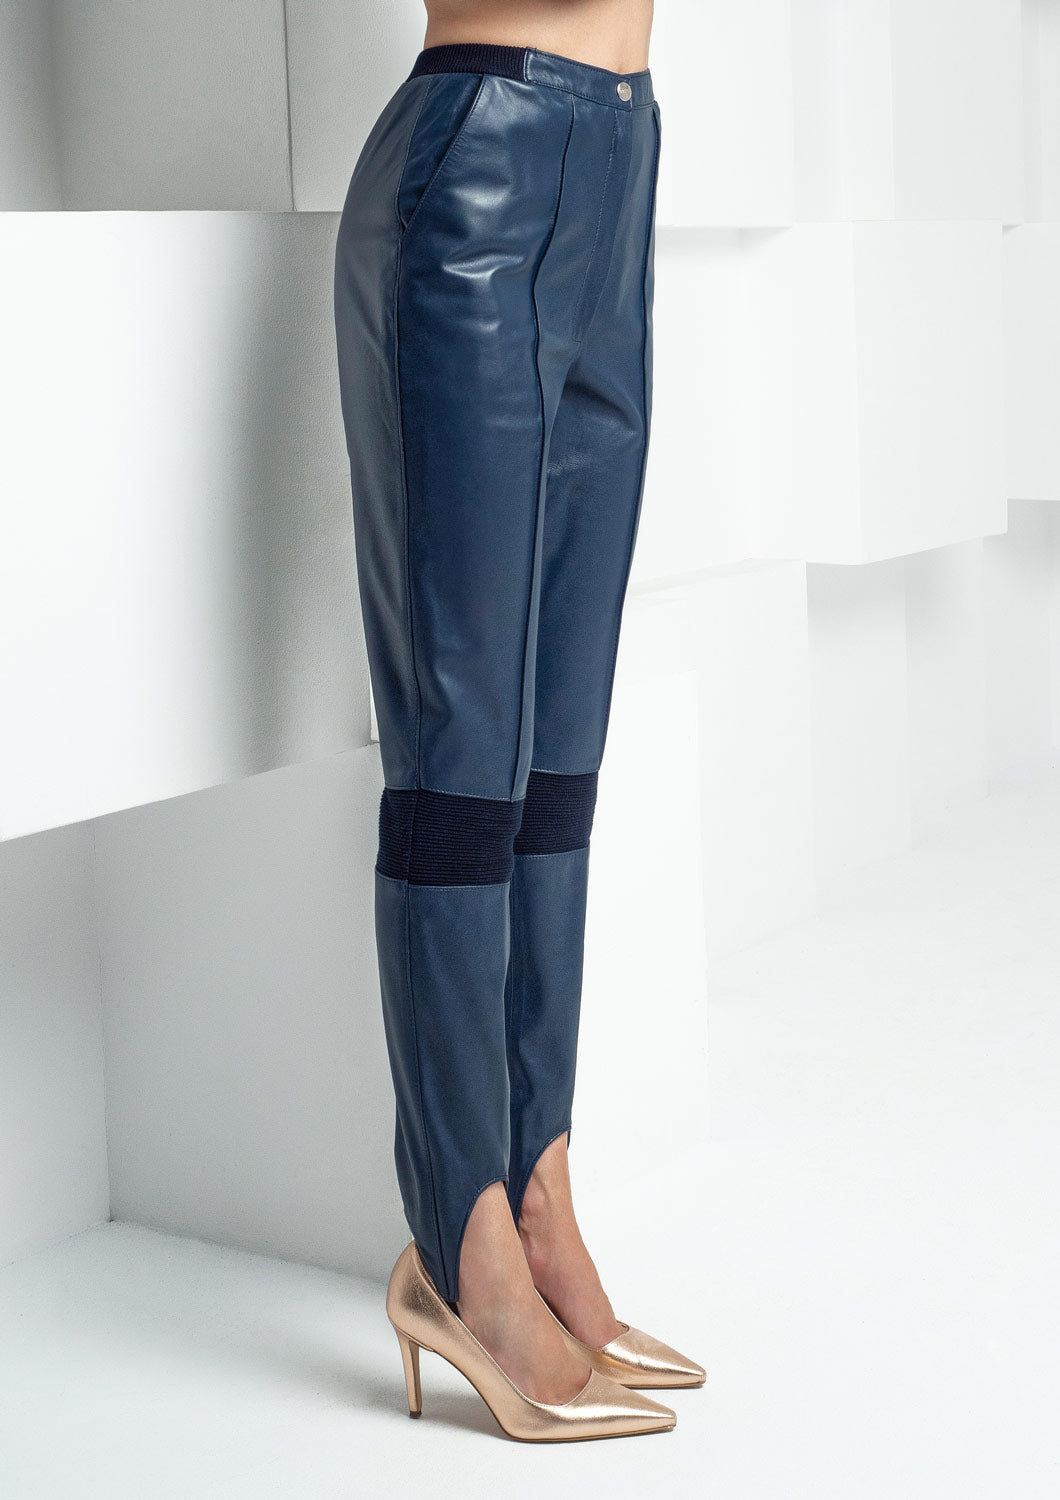 High-waisted trousers with bands under the legs